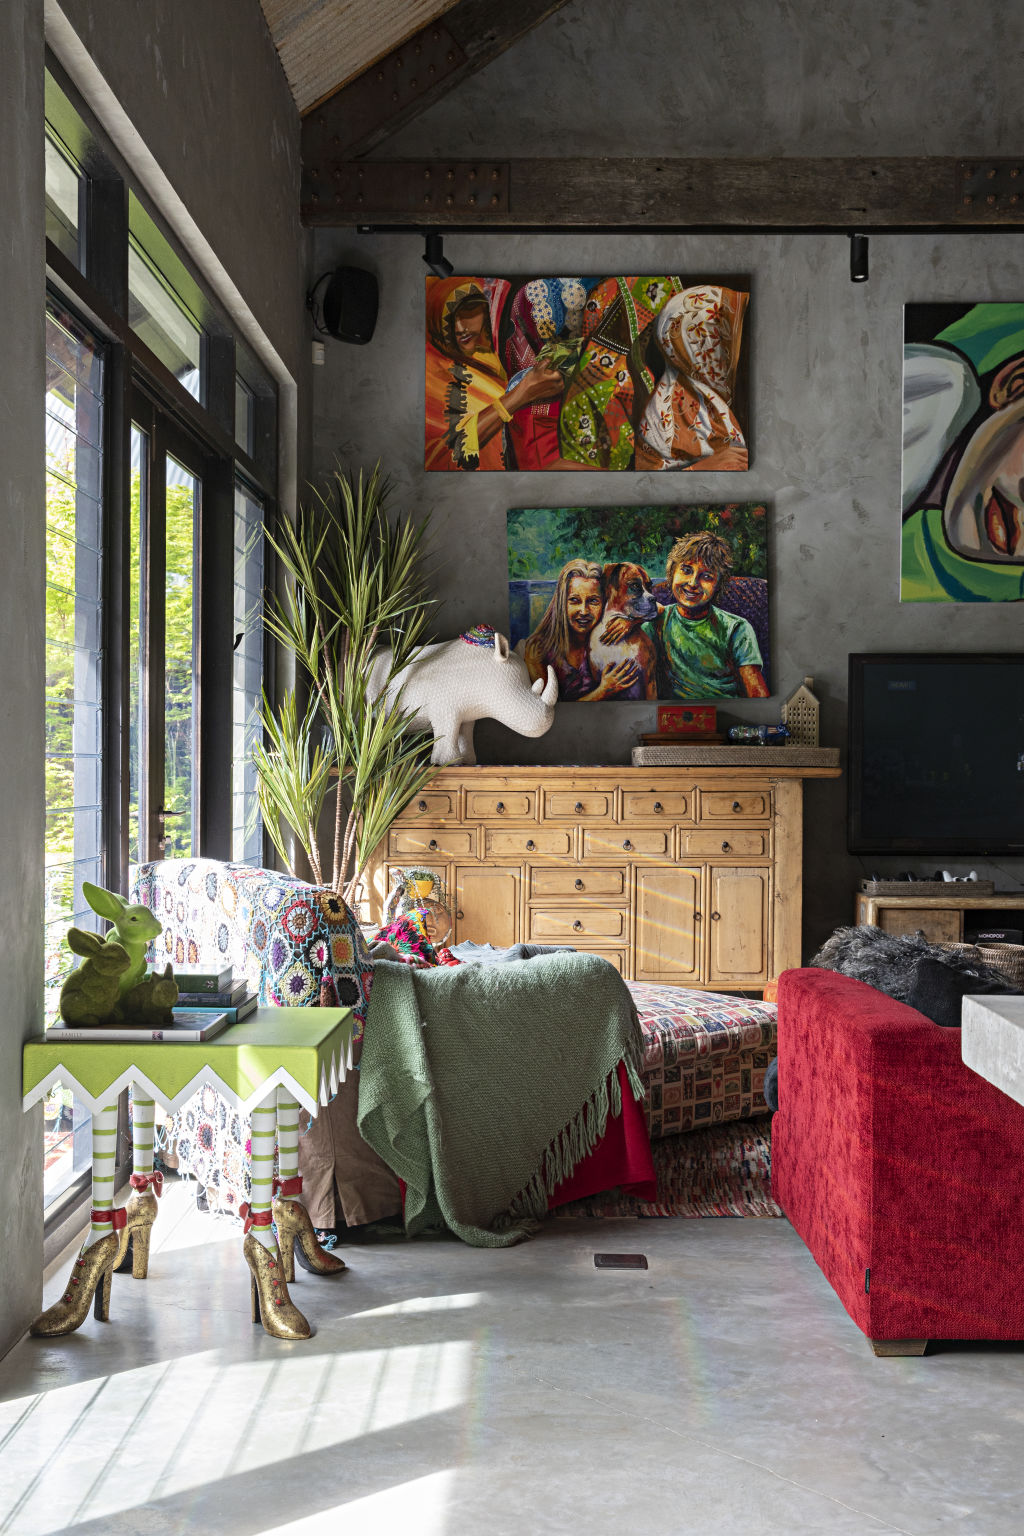 Brereton has created a home that has been inspired by her extensive travels, blending the textures, colours and designs of the many places she has visited and loved. Photo: Natalie Jeffcott